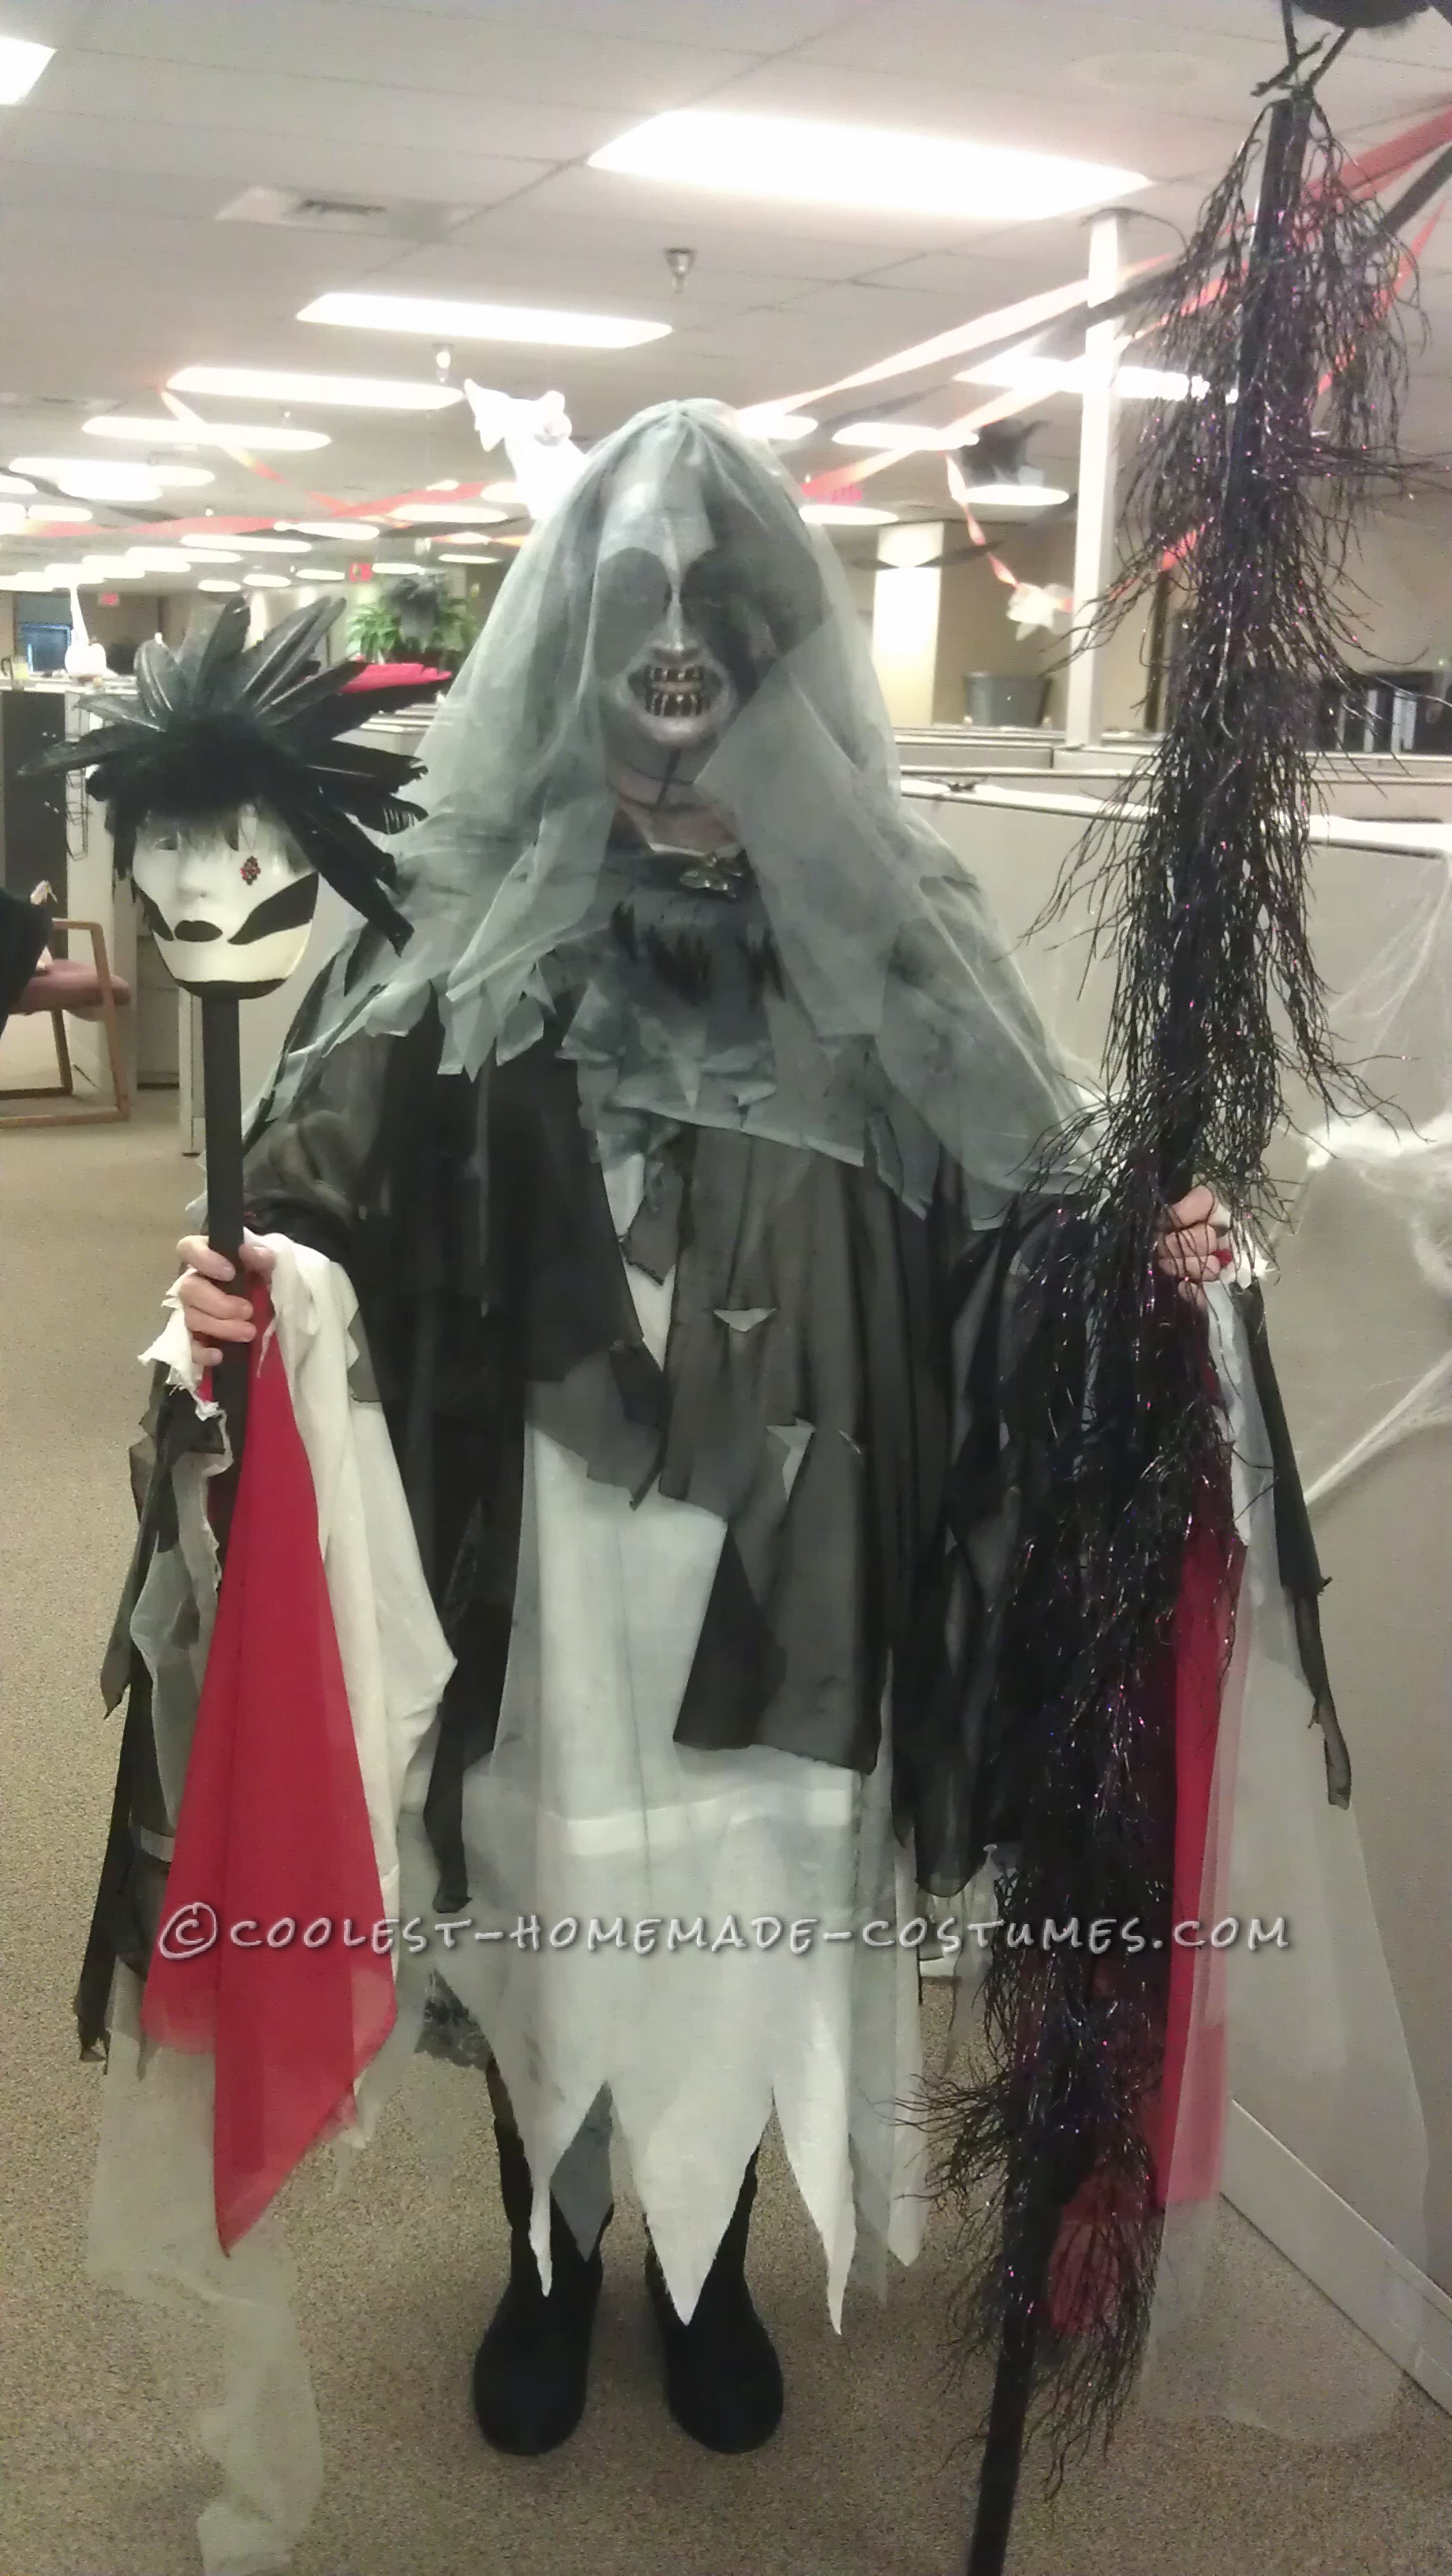 Creepy Homemade Costume: The Morrigan Has Come to Take Your Soul!